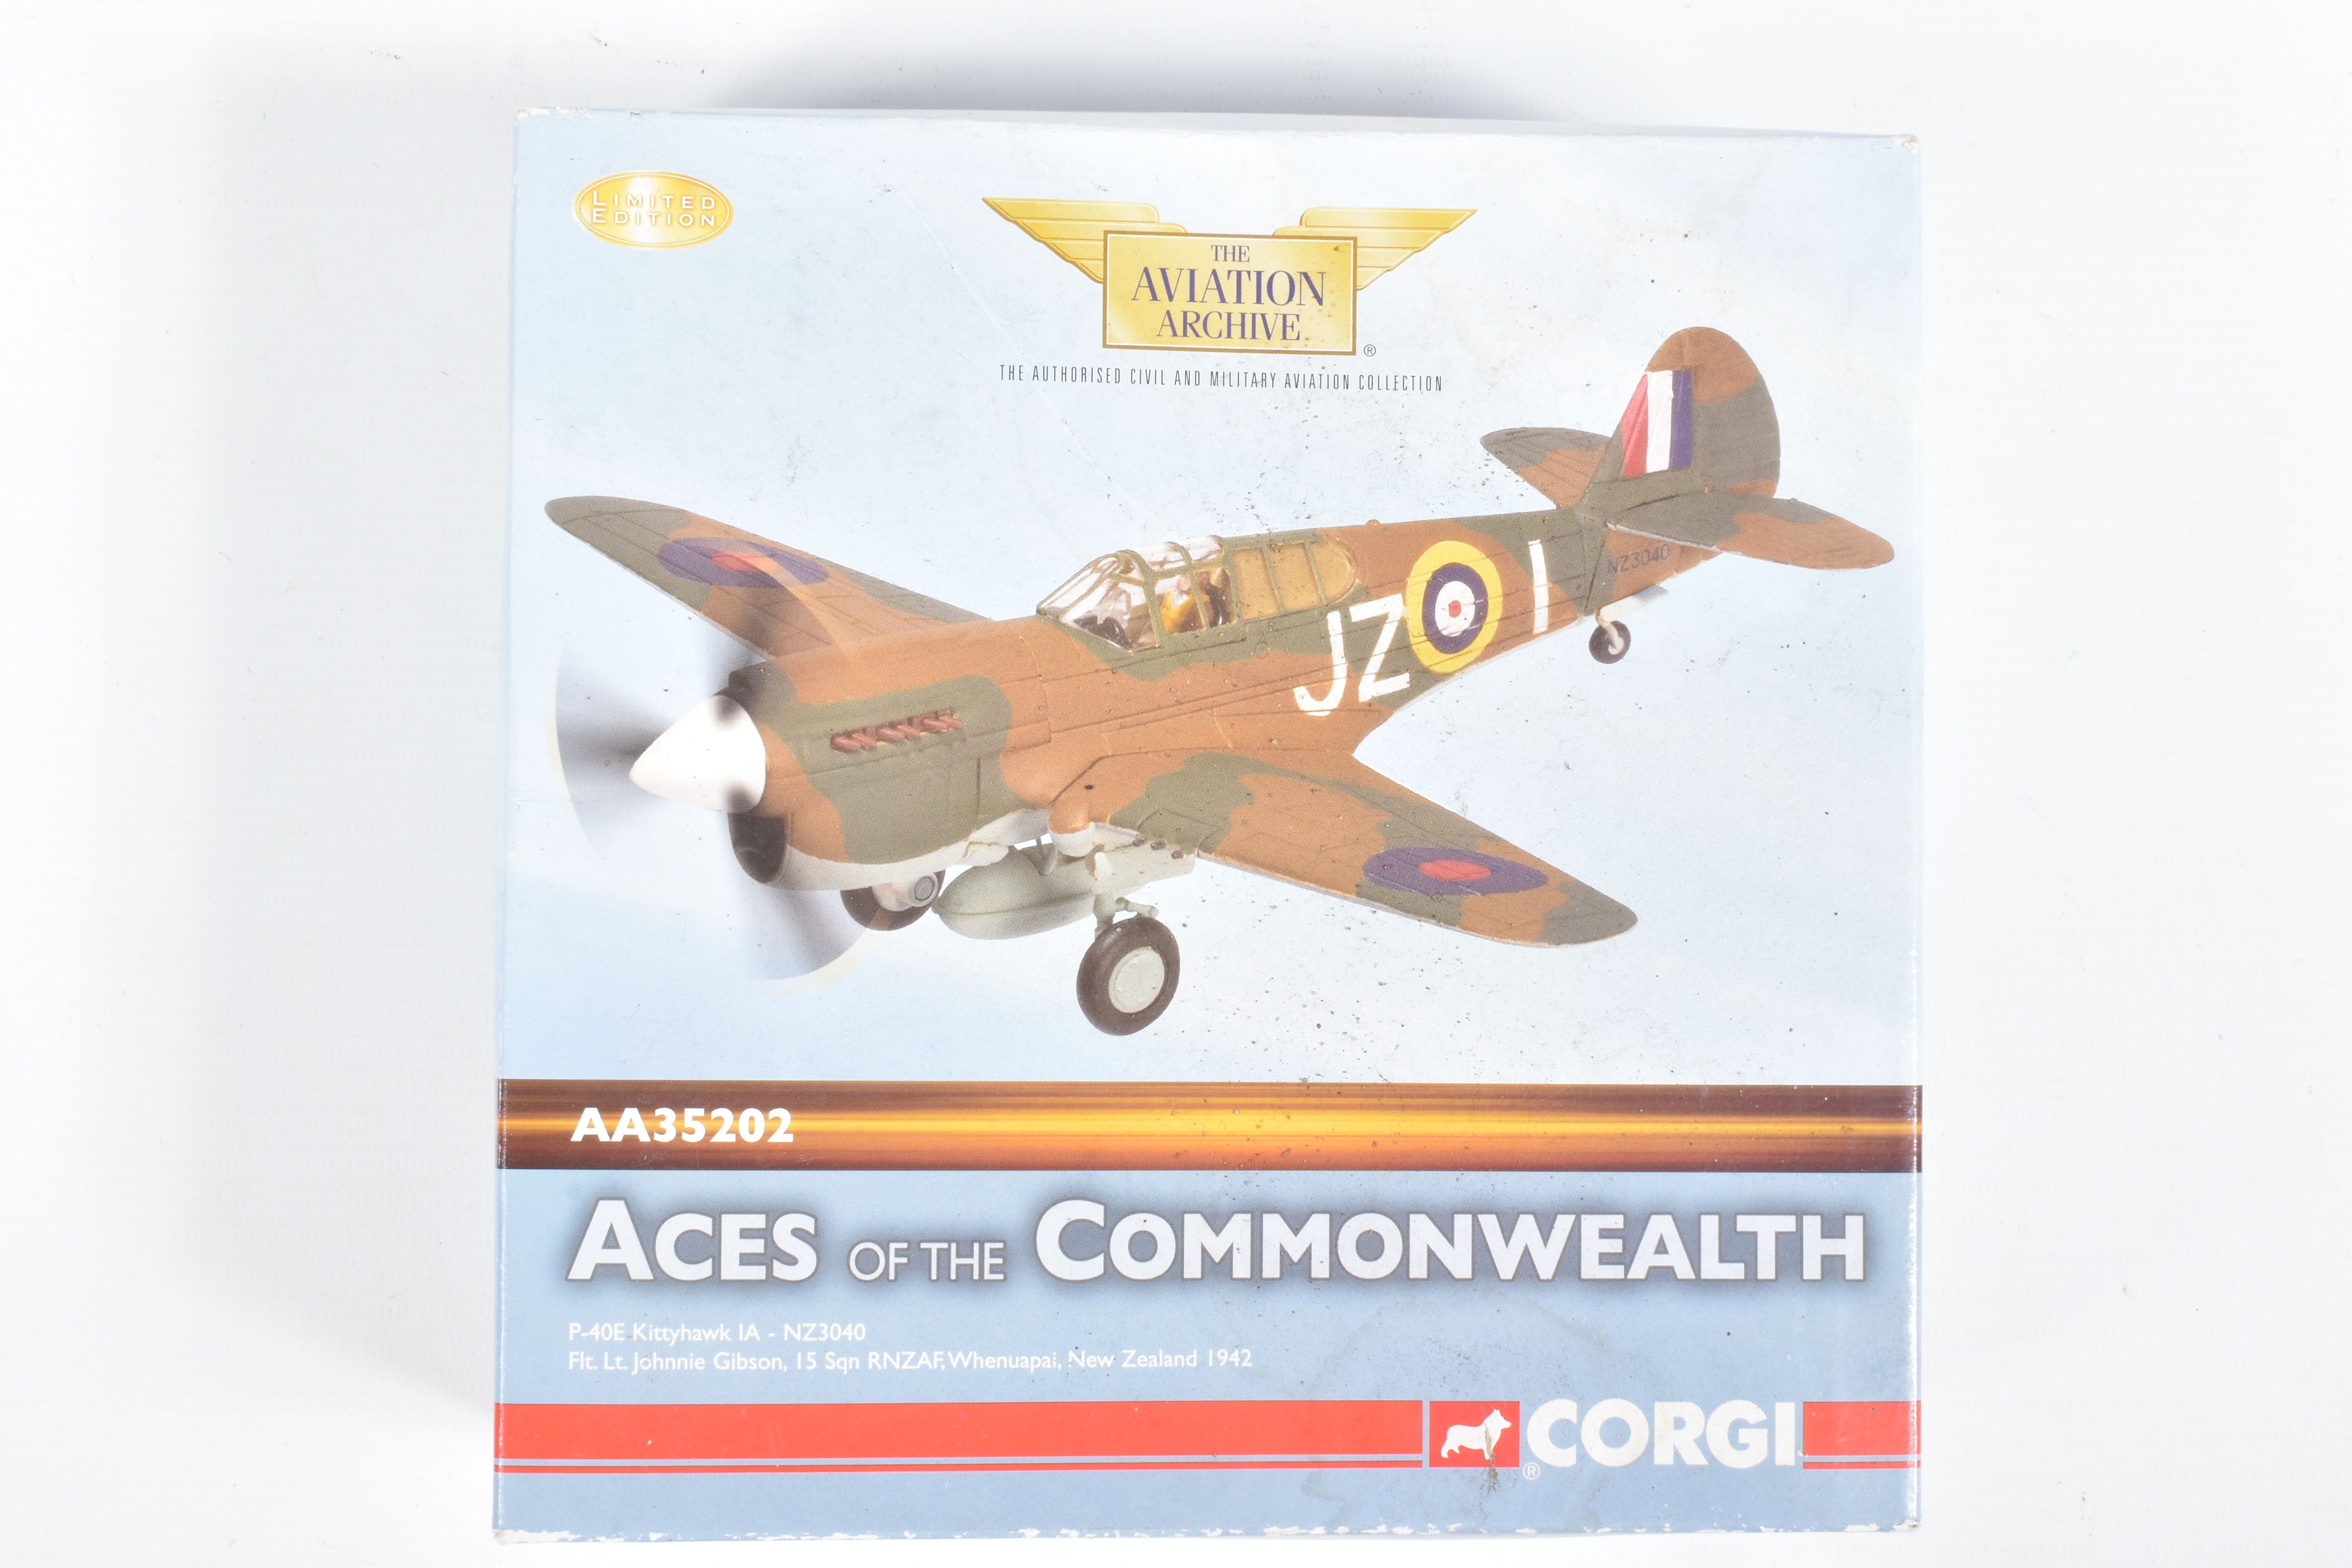 FOUR BOXED 1:27 SCALE LIMITED EDITION CORGI AVIATION ARCHIVE DIECAST MODEL AIRCRAFTS, the first is a - Image 6 of 9